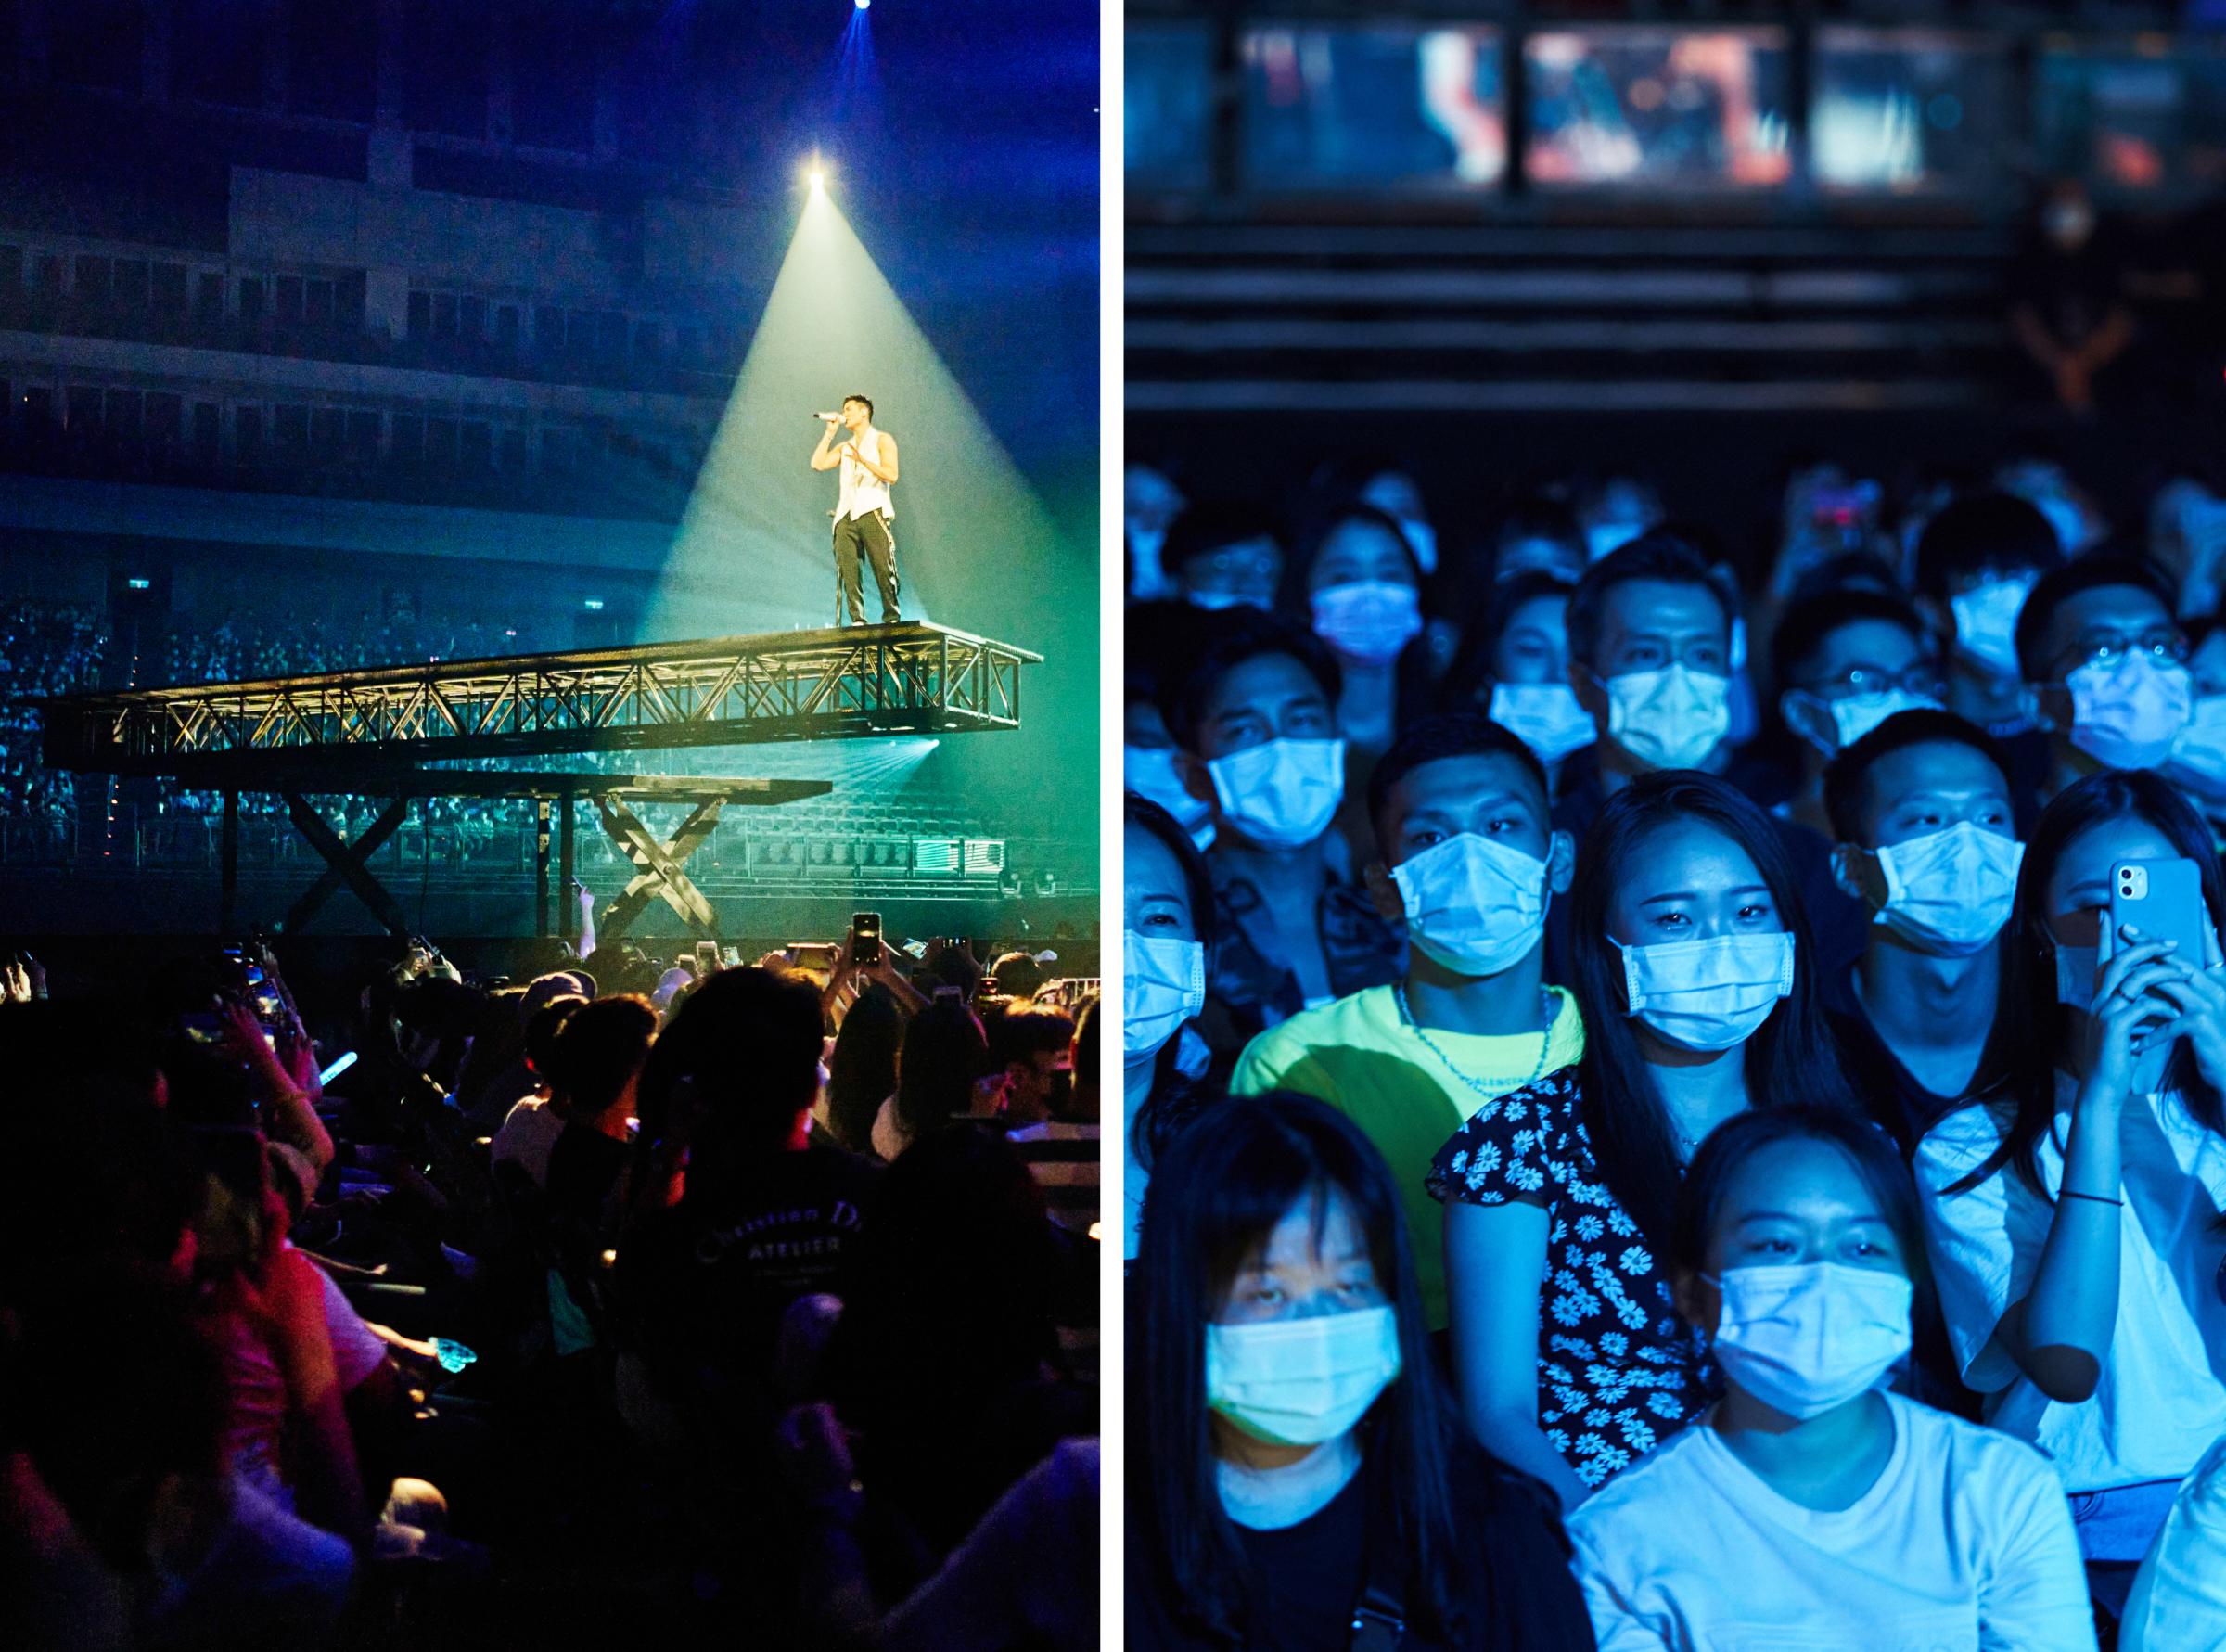 Left: Chou during his concert. Right: A quick glance across the crowd of thousands at any moment throughout the evening revealed nearly all of the attendees’ faces covered, with only a stray mask tucked beneath a chin and the occasional nose exposed to allow for some deeper breaths.